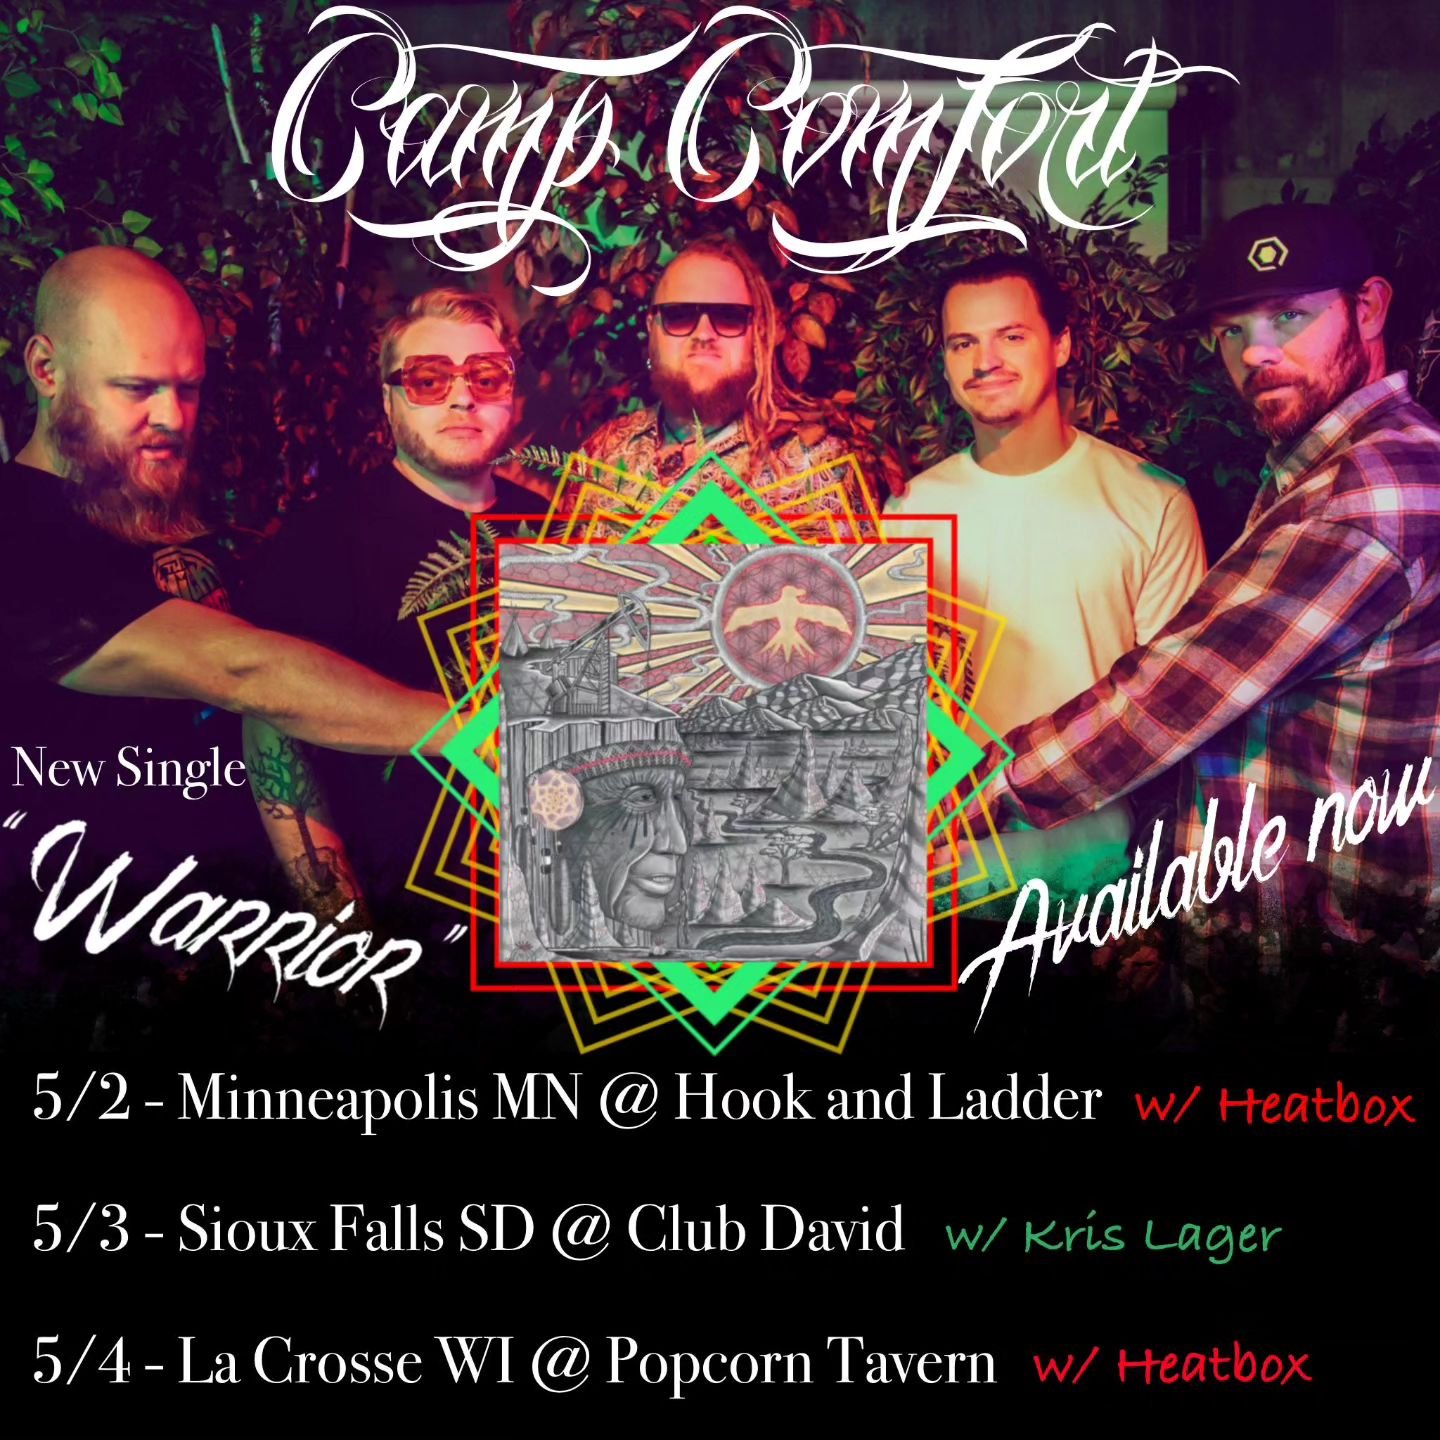 Schedule for this week! Get out and see us!
.
.
.
.
.
.
#tourlife #touringband #minnesota #wisconsin